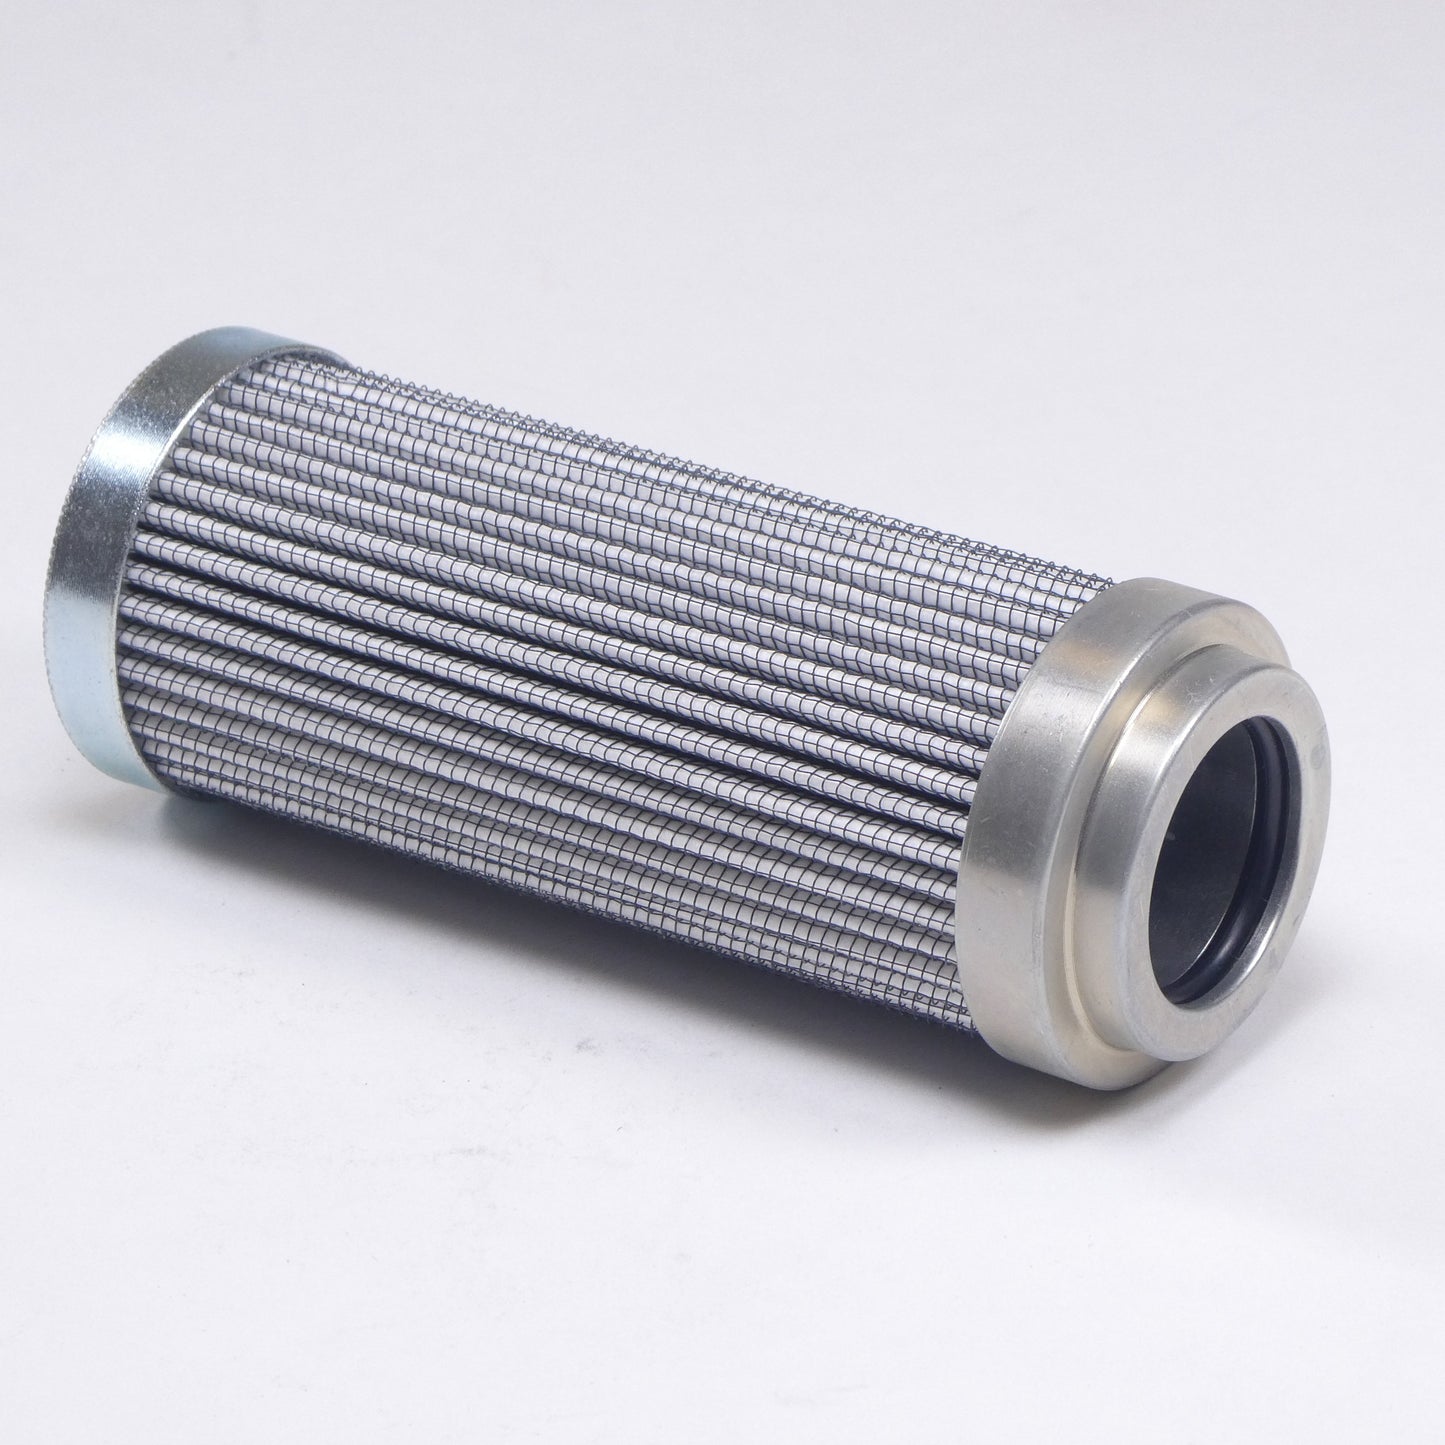 Hydrafil Replacement Filter Element for Donaldson DT-9021-4-5UM